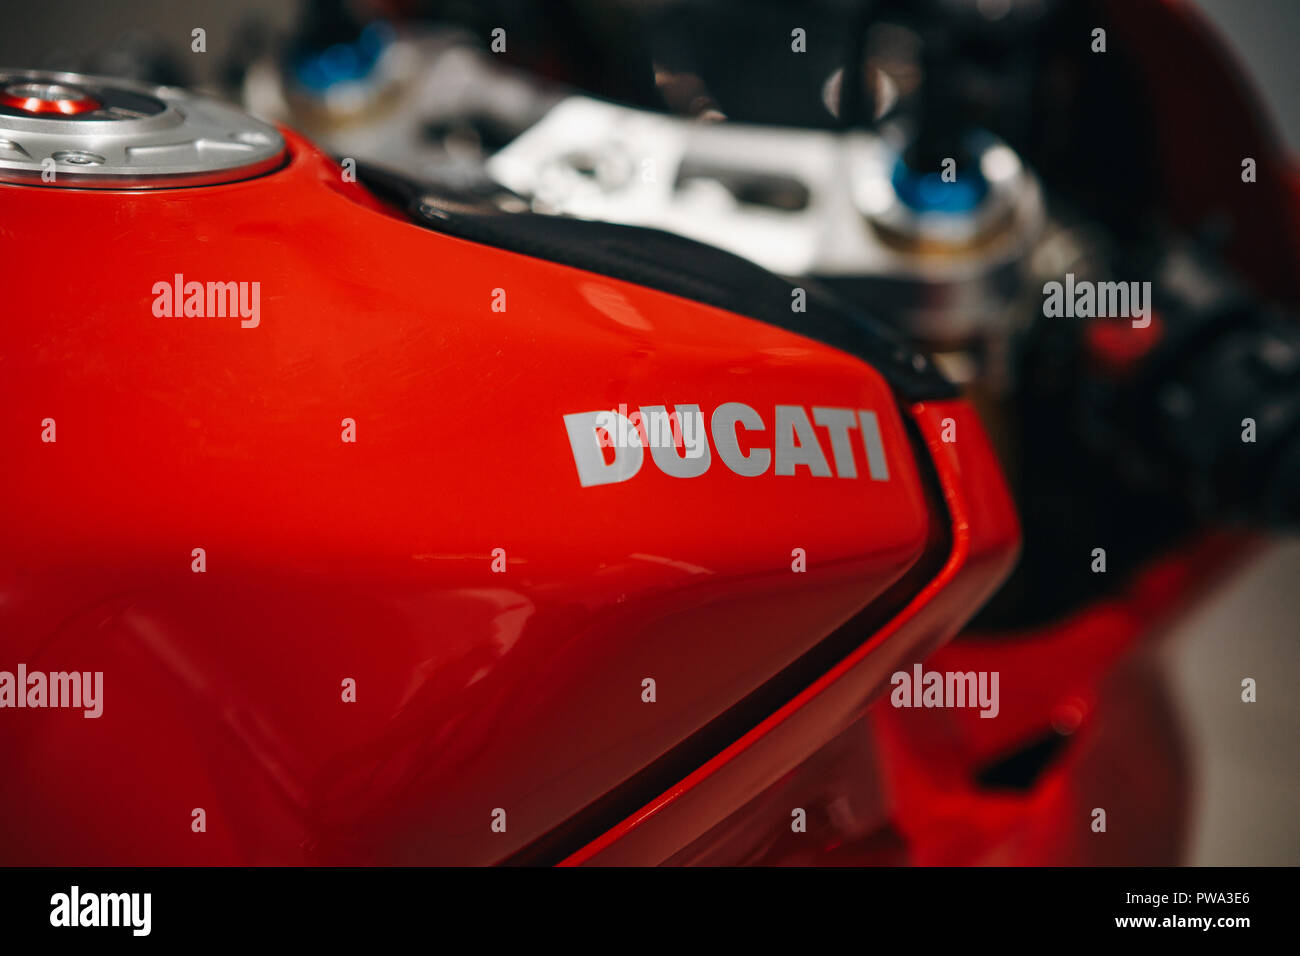 Berlin, August 29, 2018: Close-up. Emblem of Dukati on a sport red motorcycle. The world-famous Italian company producing sports motorcycles. Stock Photo